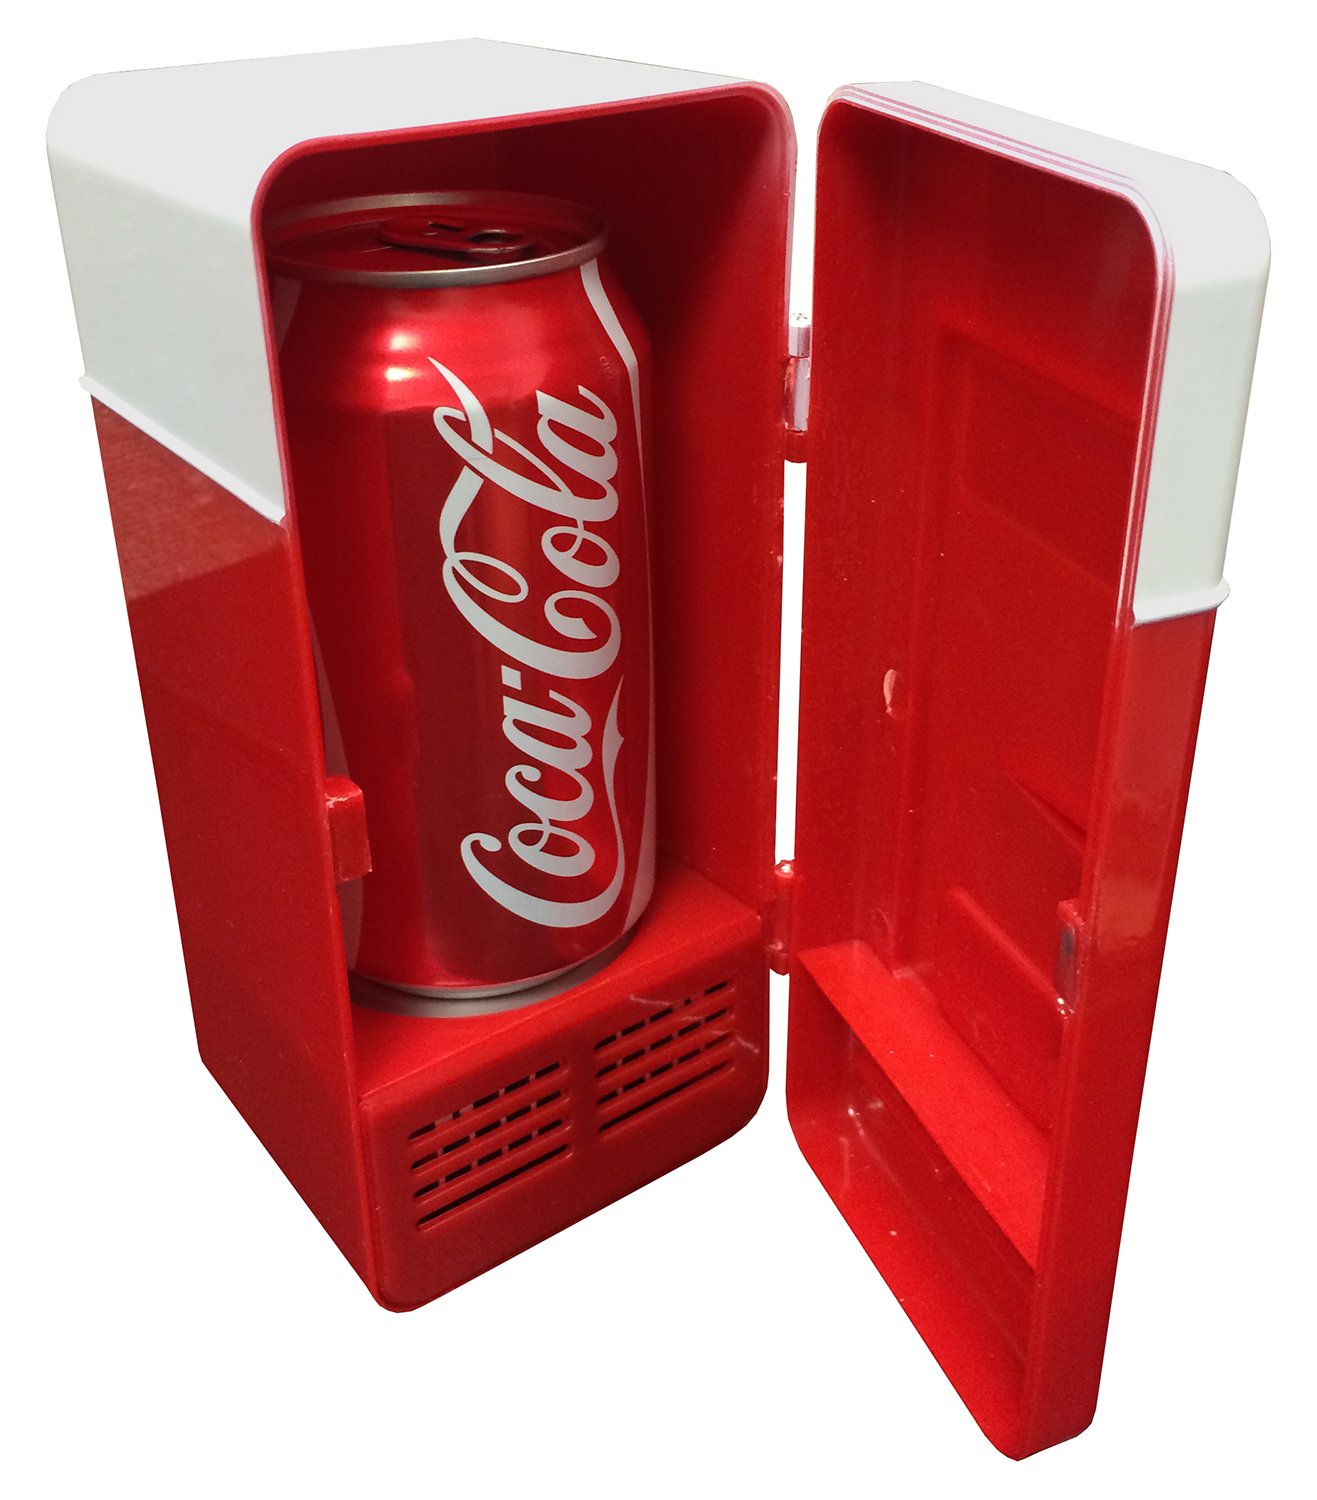 Coca Cola Single Can Cooler, Red, USB Powered Retro One Can Mini Fridge, Thermoelectric Cooler for Desk, Home, Office, Dorm, Unique Gift for Students or Office Workers